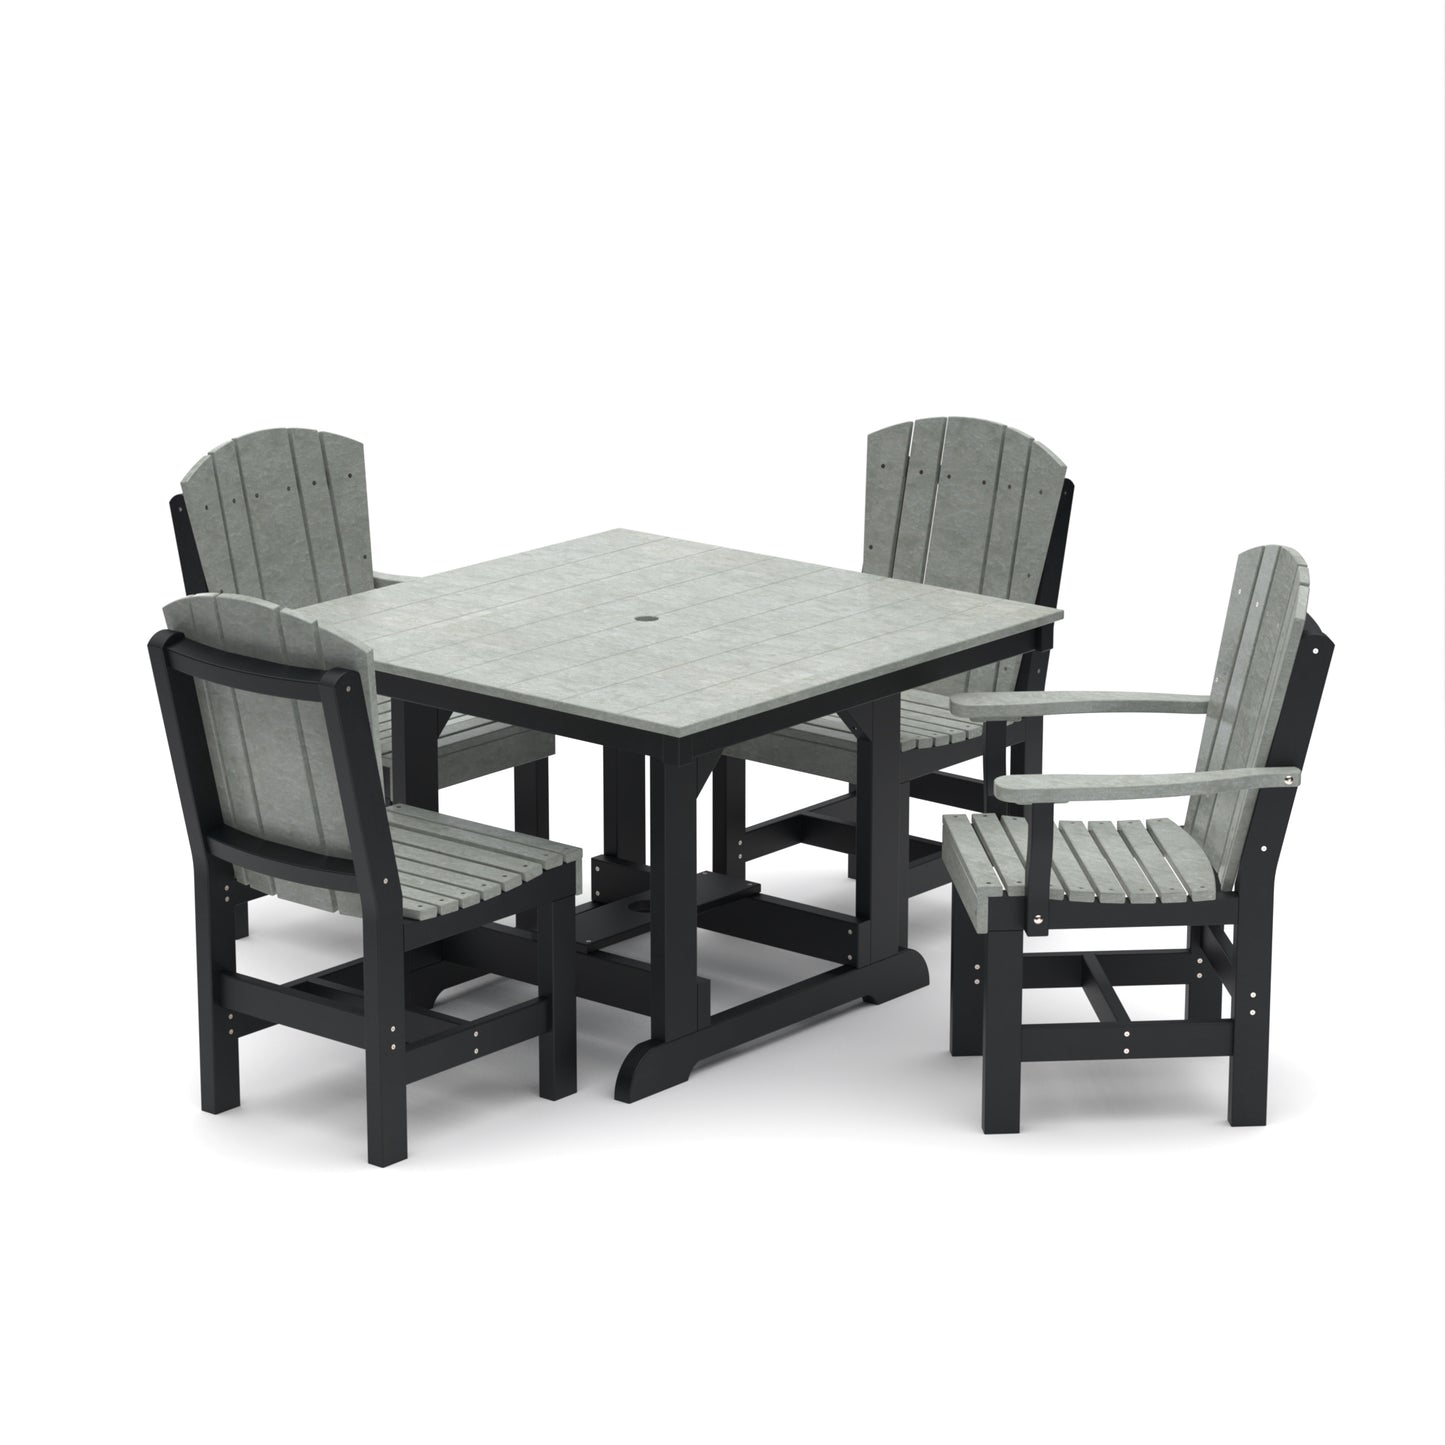 Wildridge Heritage Recycled Plastic 44x44 Table Set with 4 Dining Chairs - LEAD TIME TO SHIP  4 WEEKS